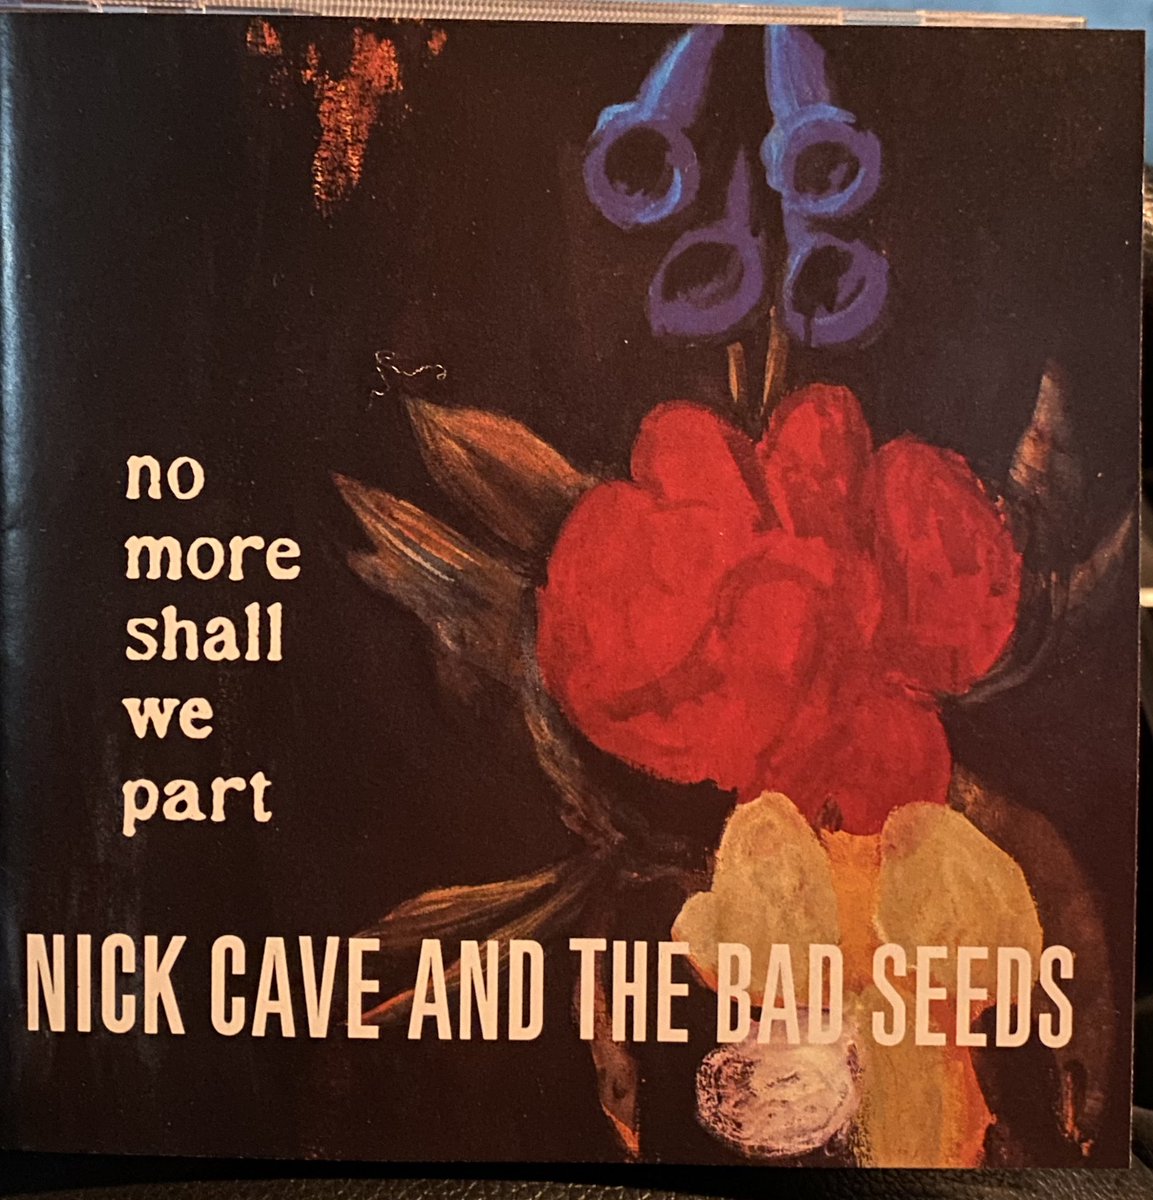 @thewiz0915 @Oil_Drop @Freyja1987 Y4 Day 43

Nick Cave and The Bad Seeds
No More Shall We Part

#AlbumOfTheDay